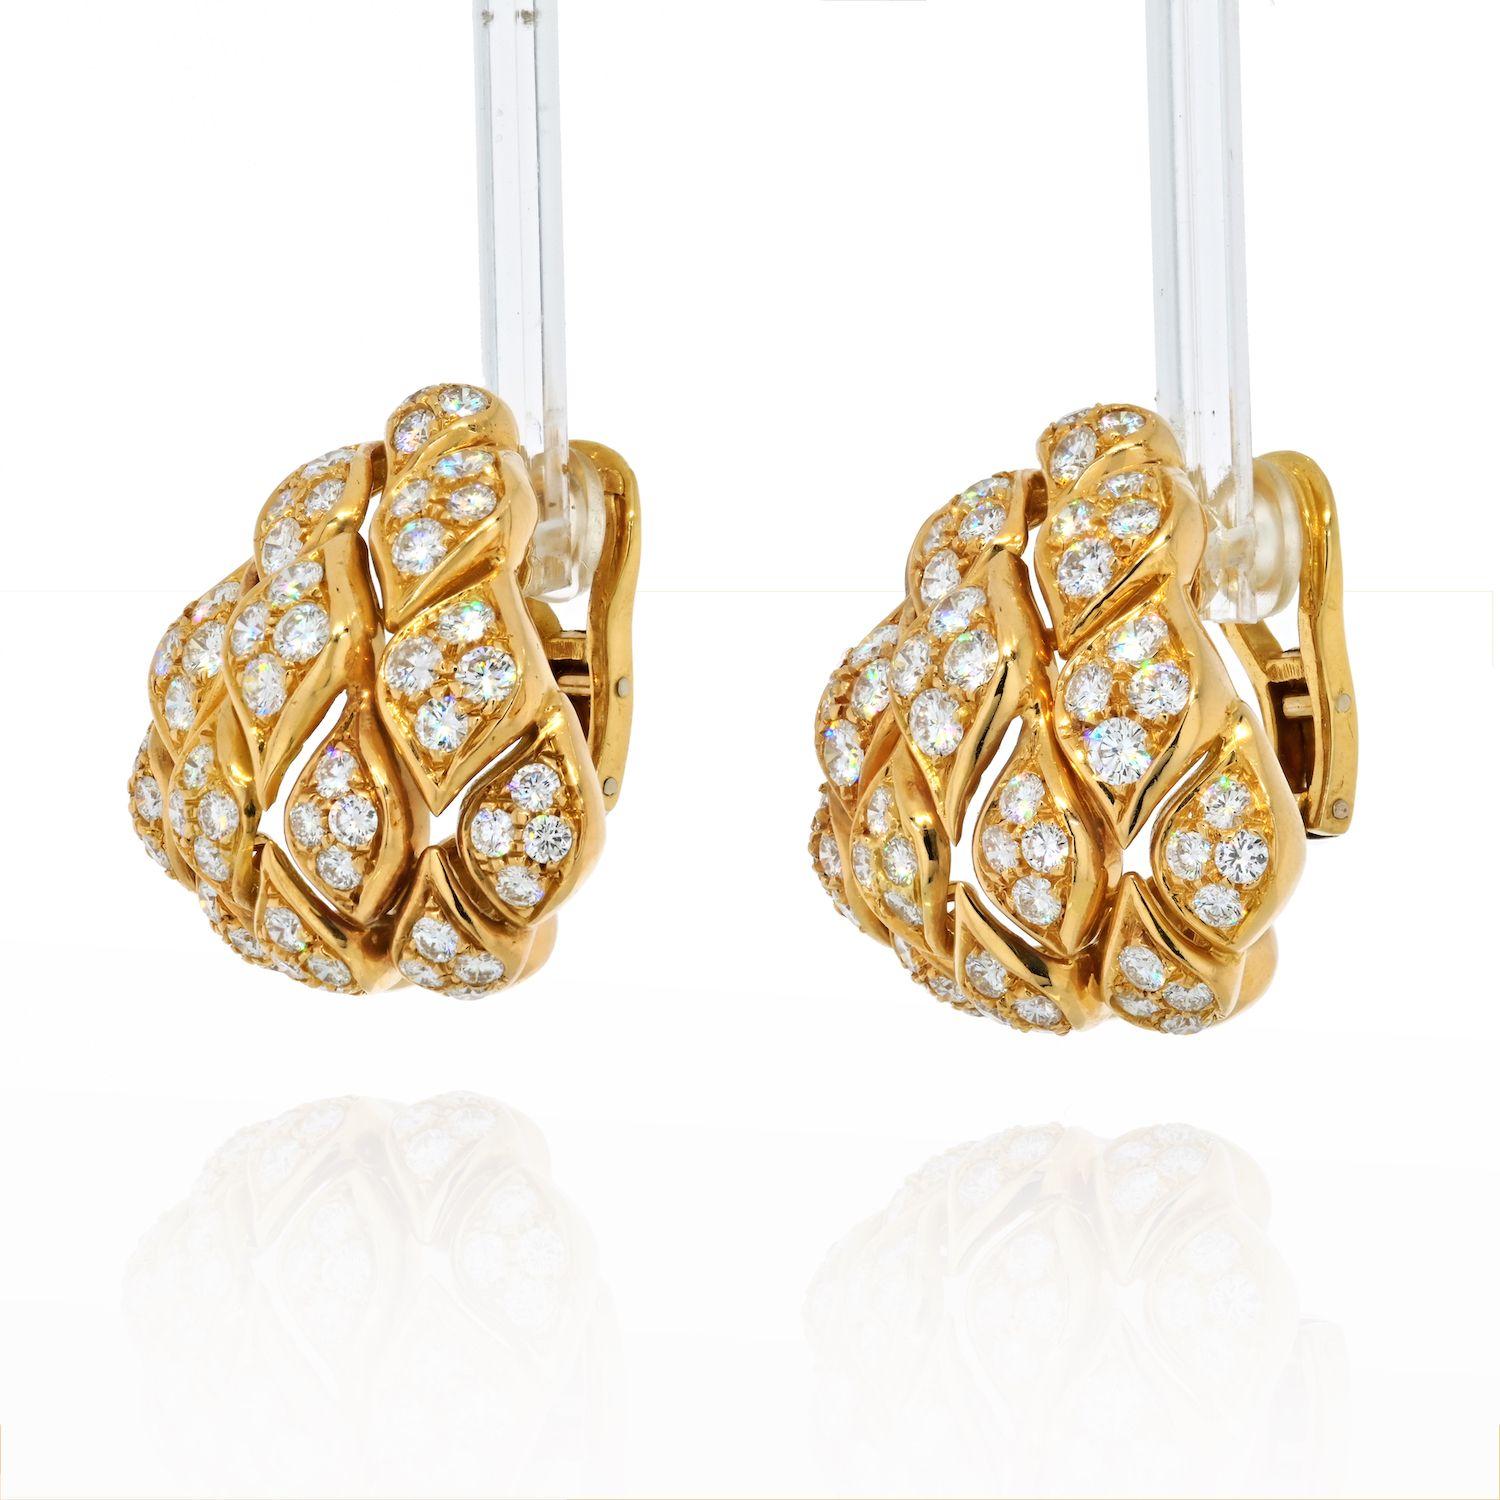 These vintage 18k yellow gold ear clips were made in France and boast a geometric form set with pave round cut diamonds. 

Extra coverage for your ears! Rest assured these are show-stopping ear clips. 
Weighing in total approximately 8.00 carats of